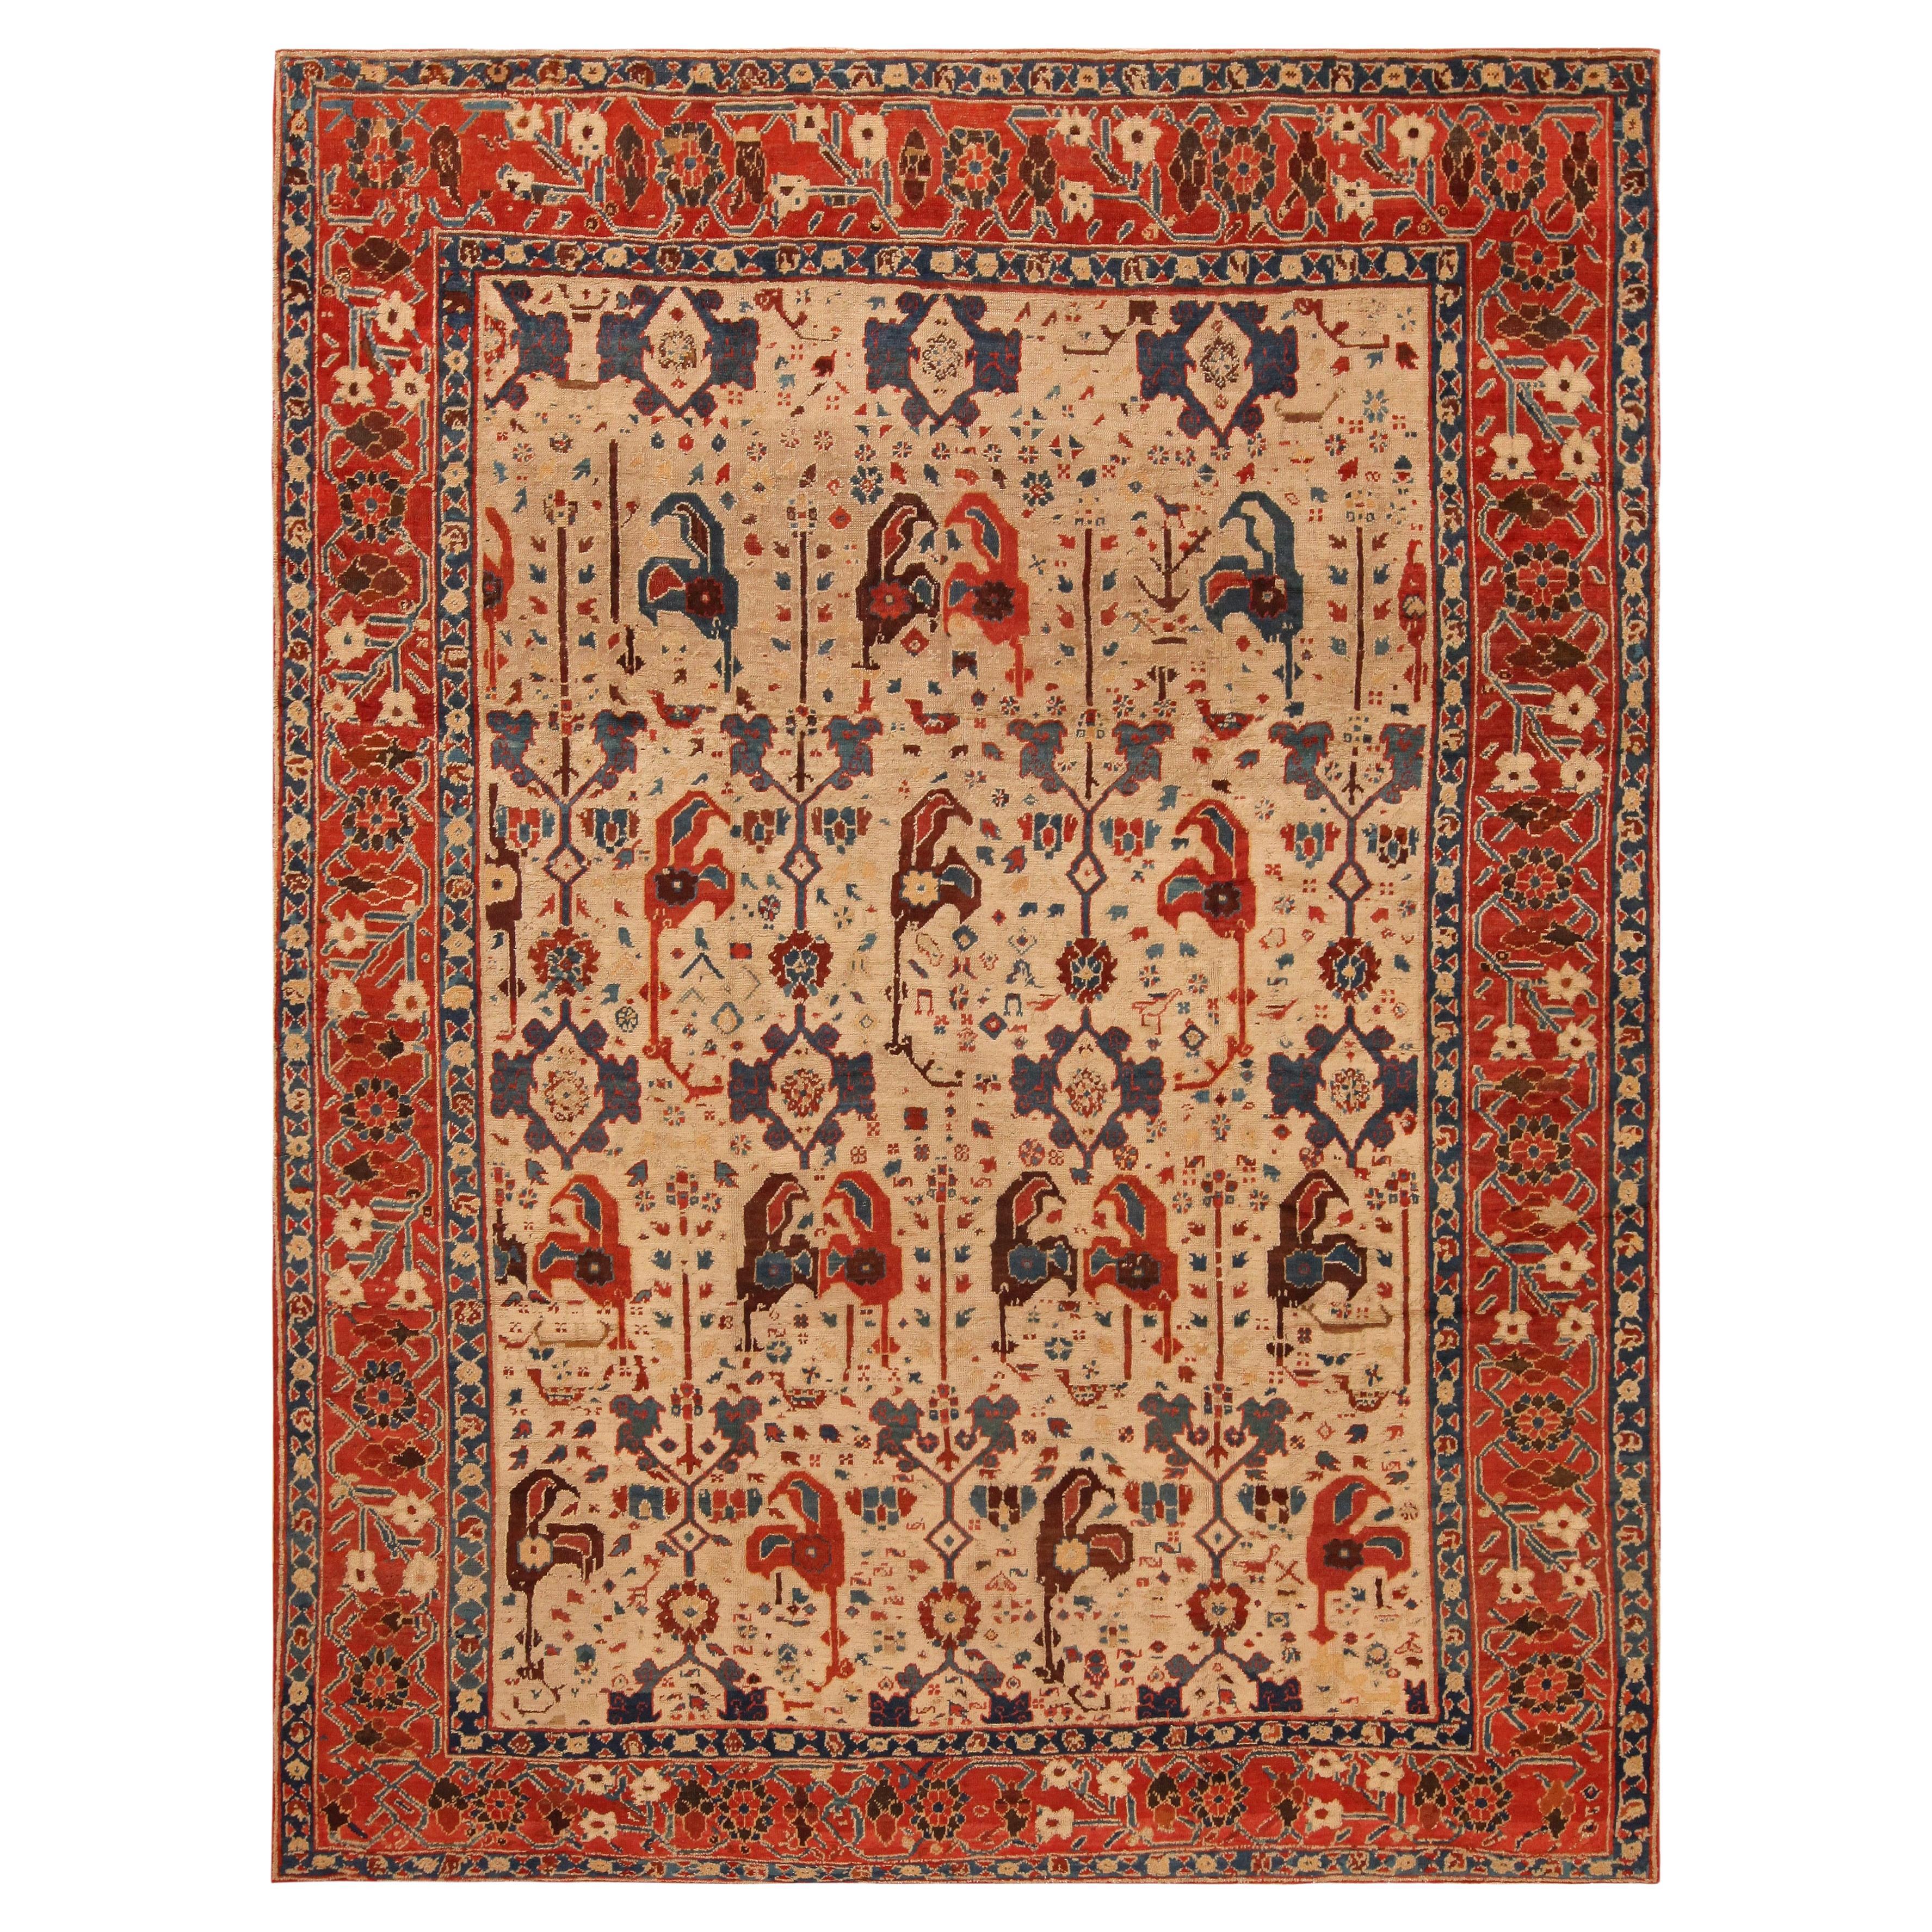 Nazmiyal Collection Antique Tribal Persian Bakshaish Rug. 8 ft 8 in x 11 ft 3 in